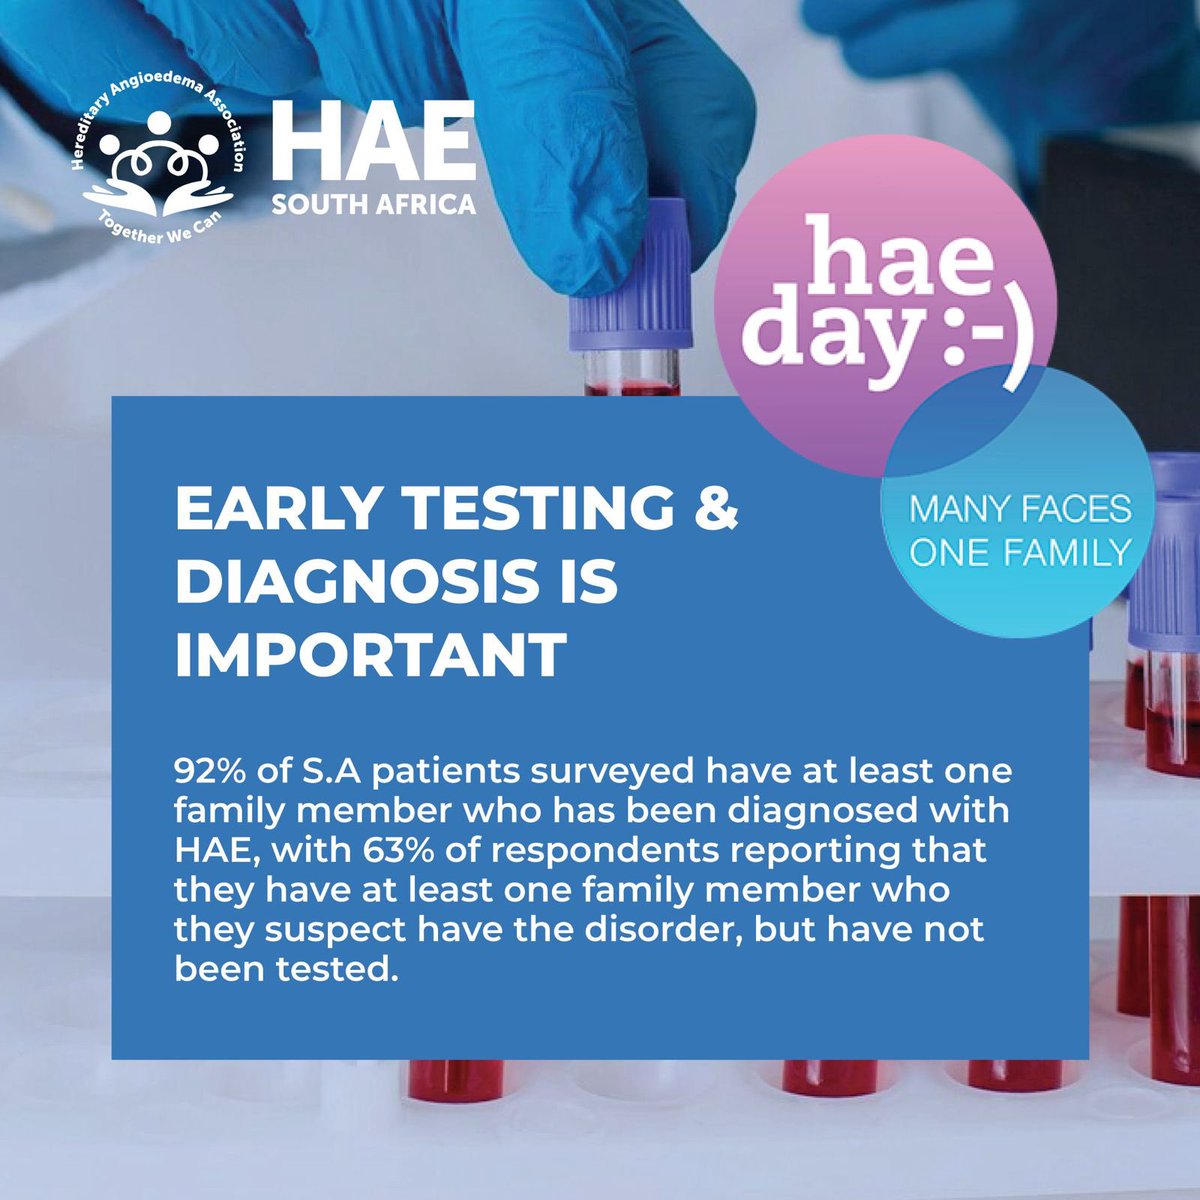 3. EARLY TESTING & DIAGNOSIS IS IMPORTANT 🧬

92% of S.A patients surveyed have at least one family member who has been diagnosed with HAE!

#haeday #haeday2024 #haesa #haesouthafrica #careforrare #hereditaryangiodema #TogetherWeCan #rarediseases #raredisease